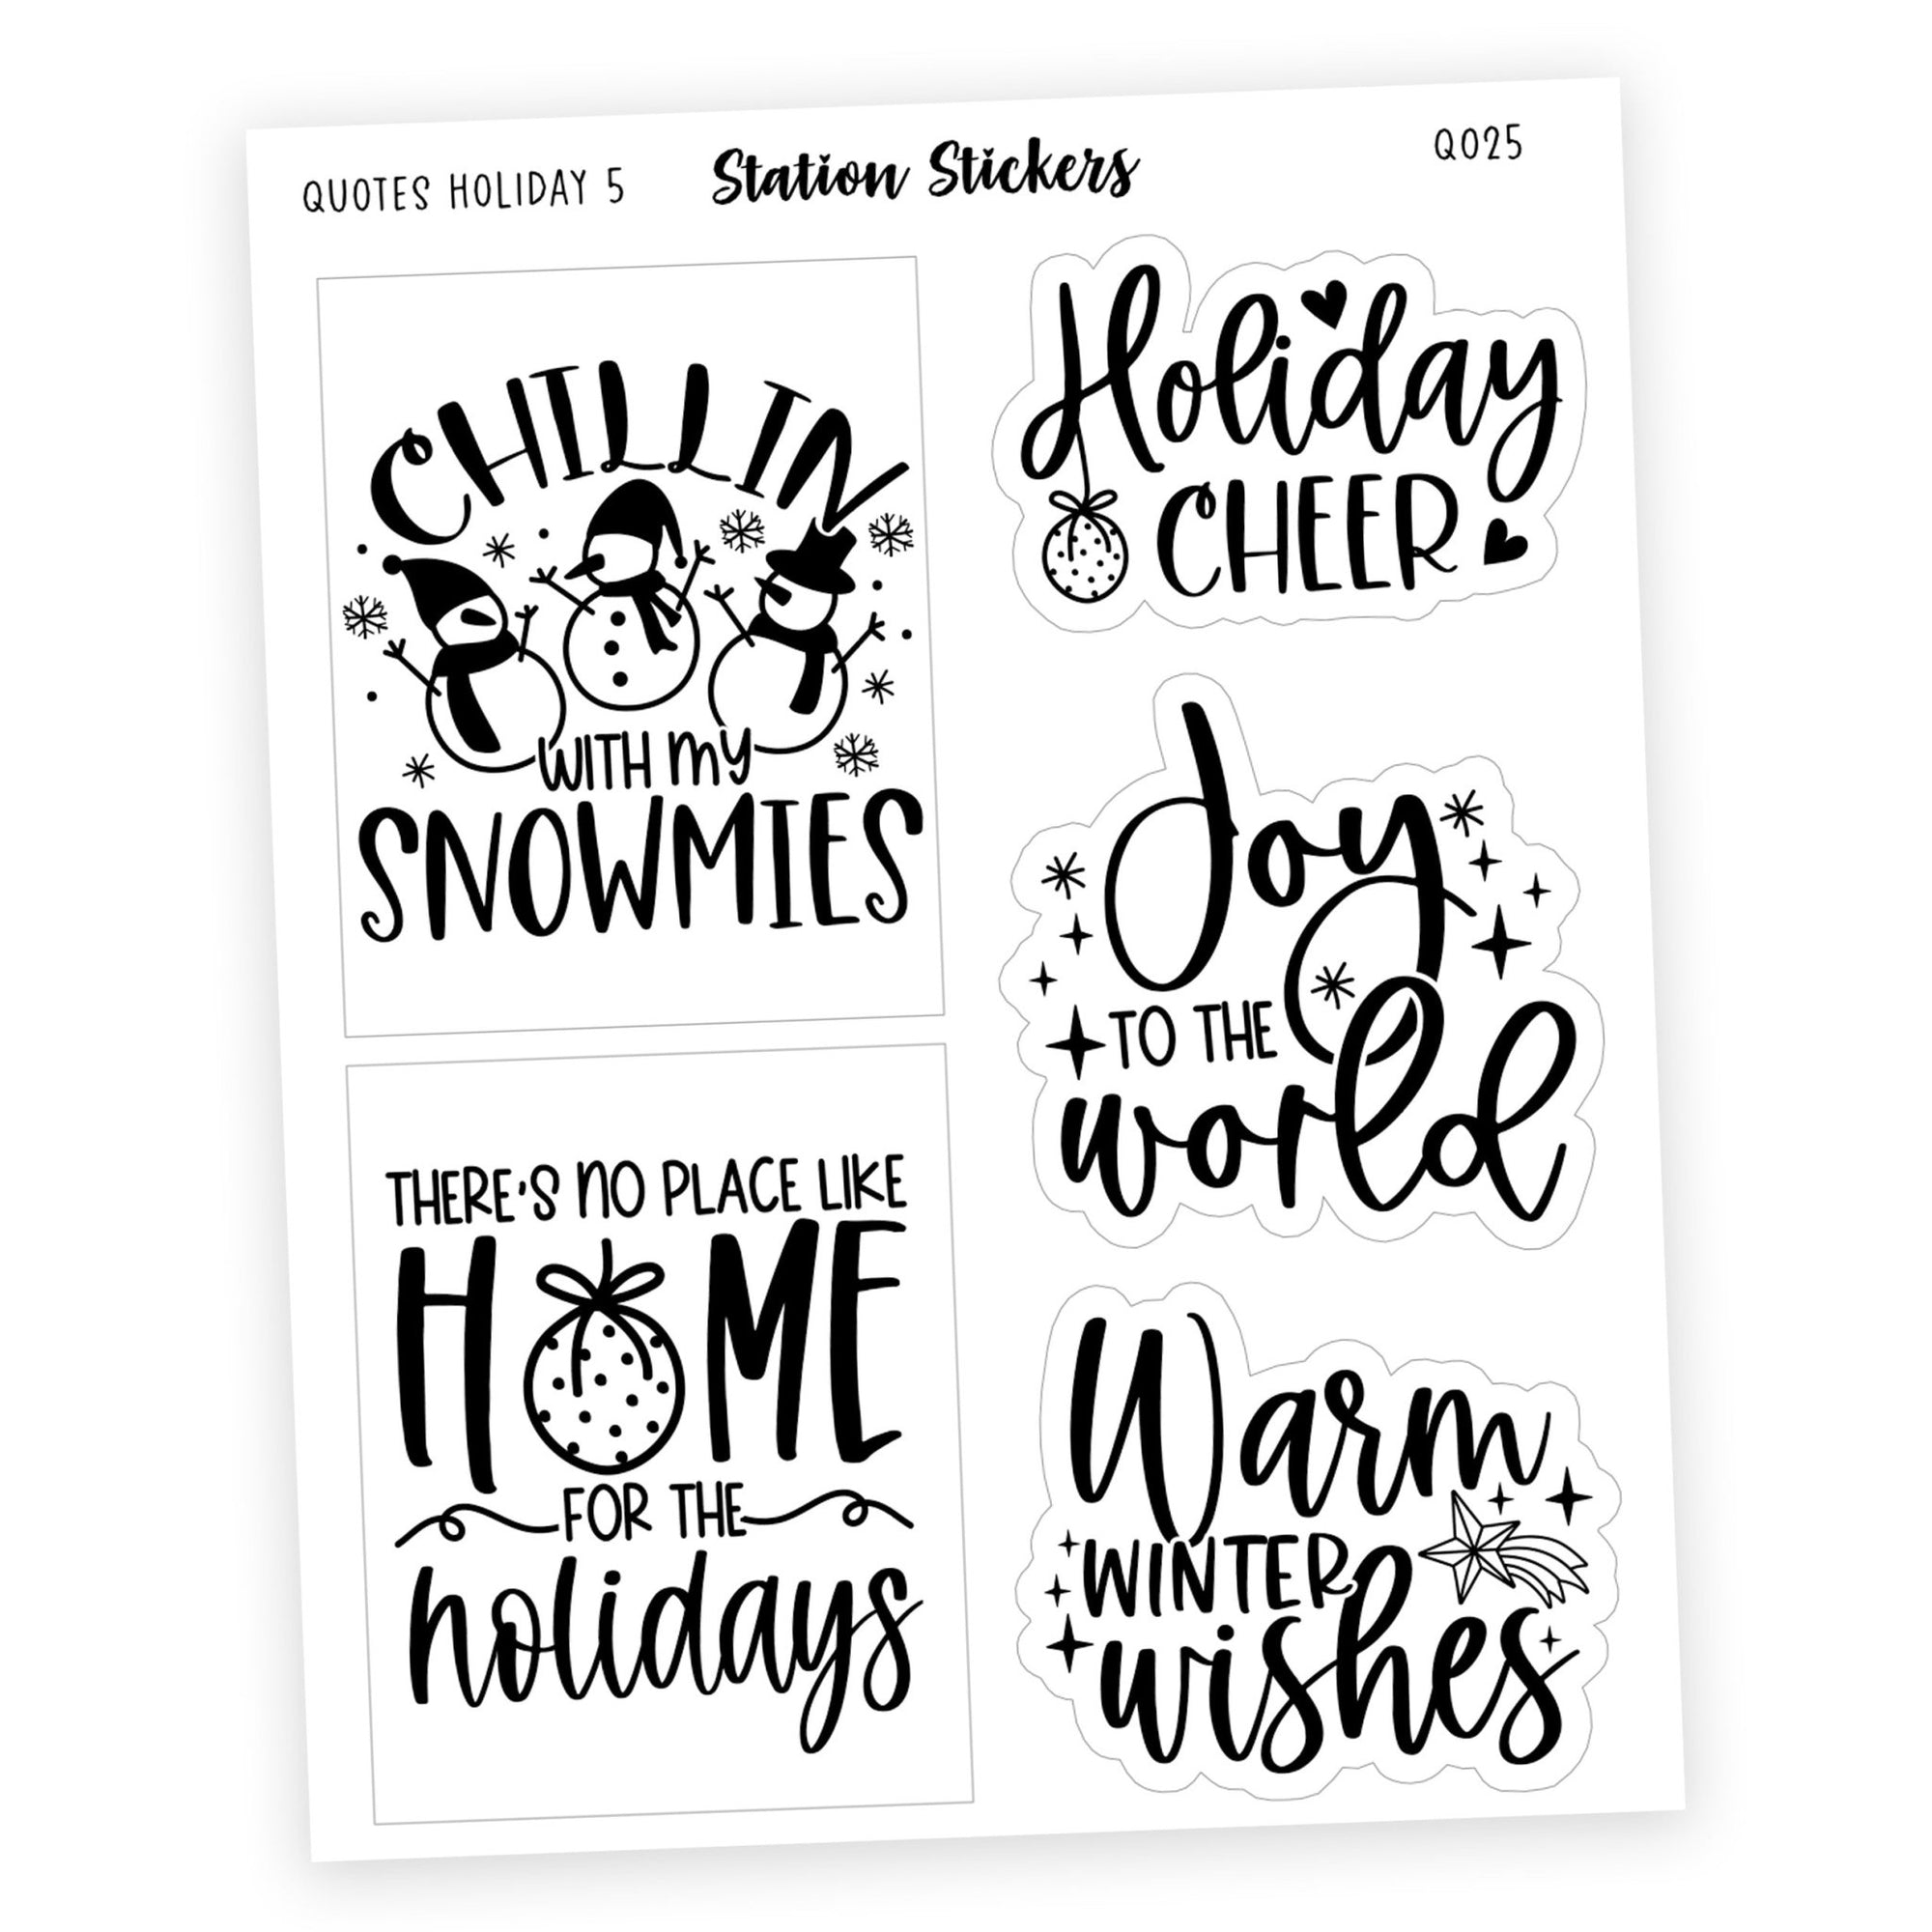 Holiday Quote Stickers #5